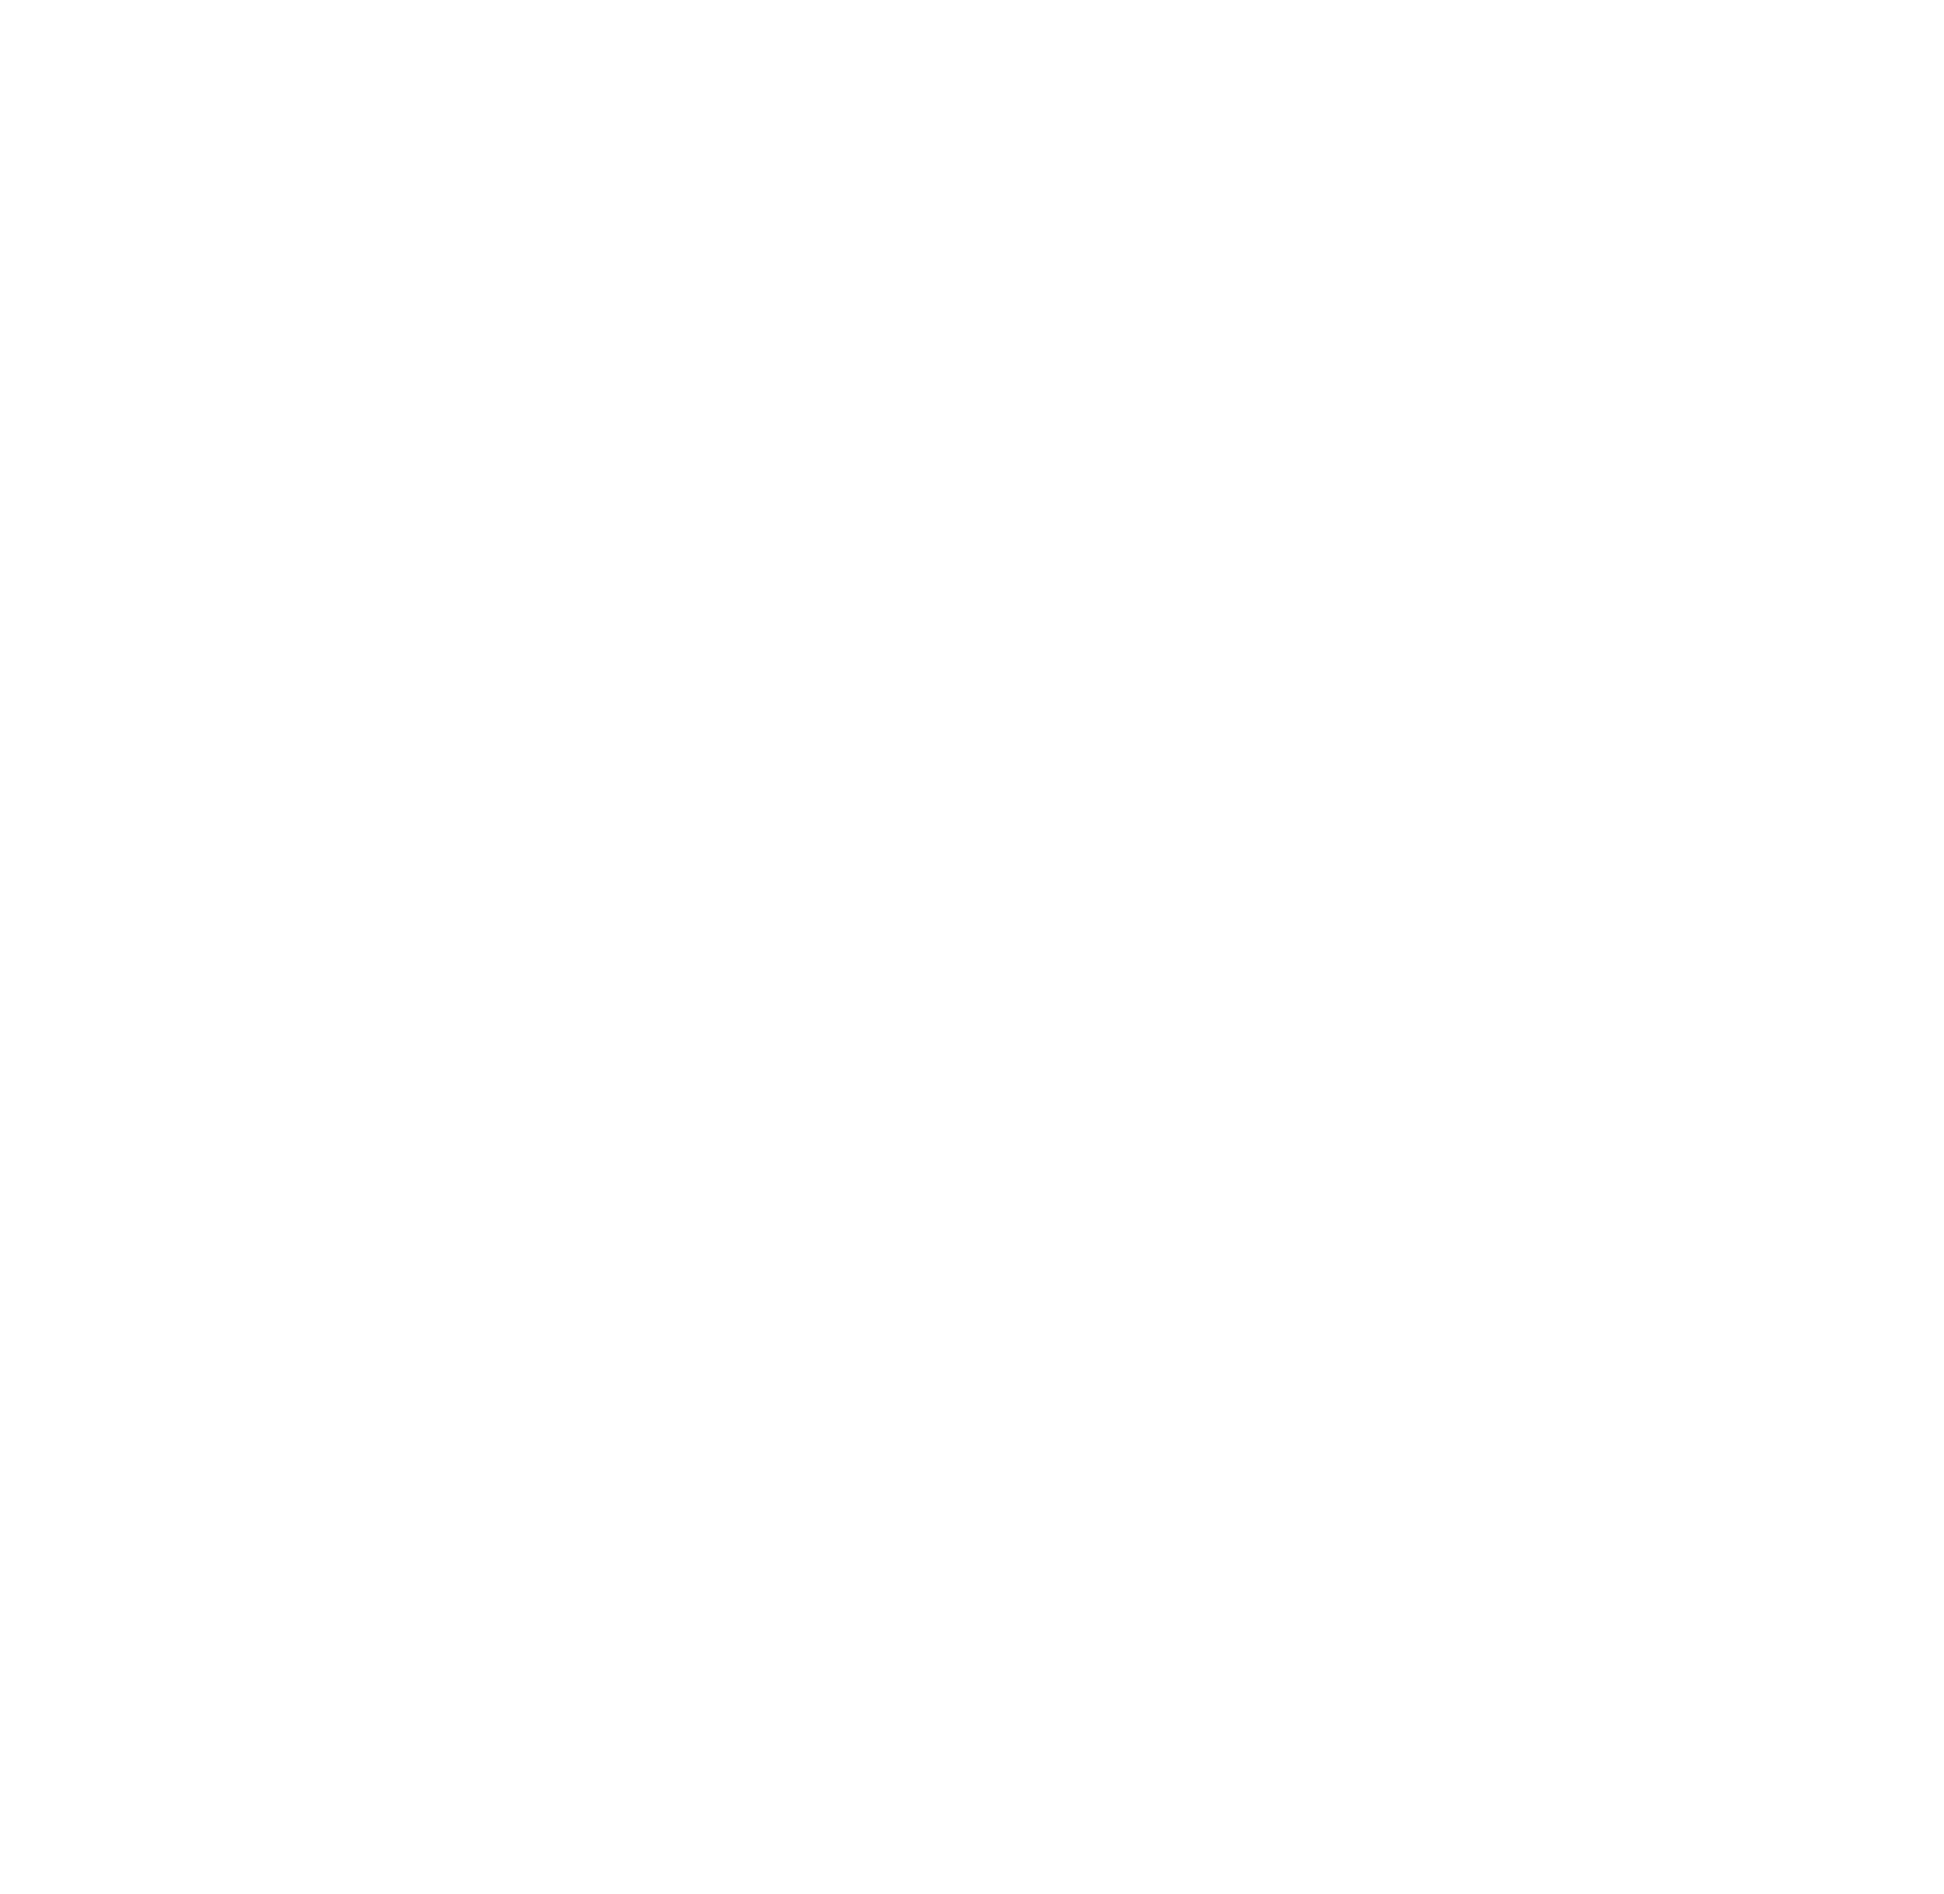 2023_Official_Selection_(Plain_White).png